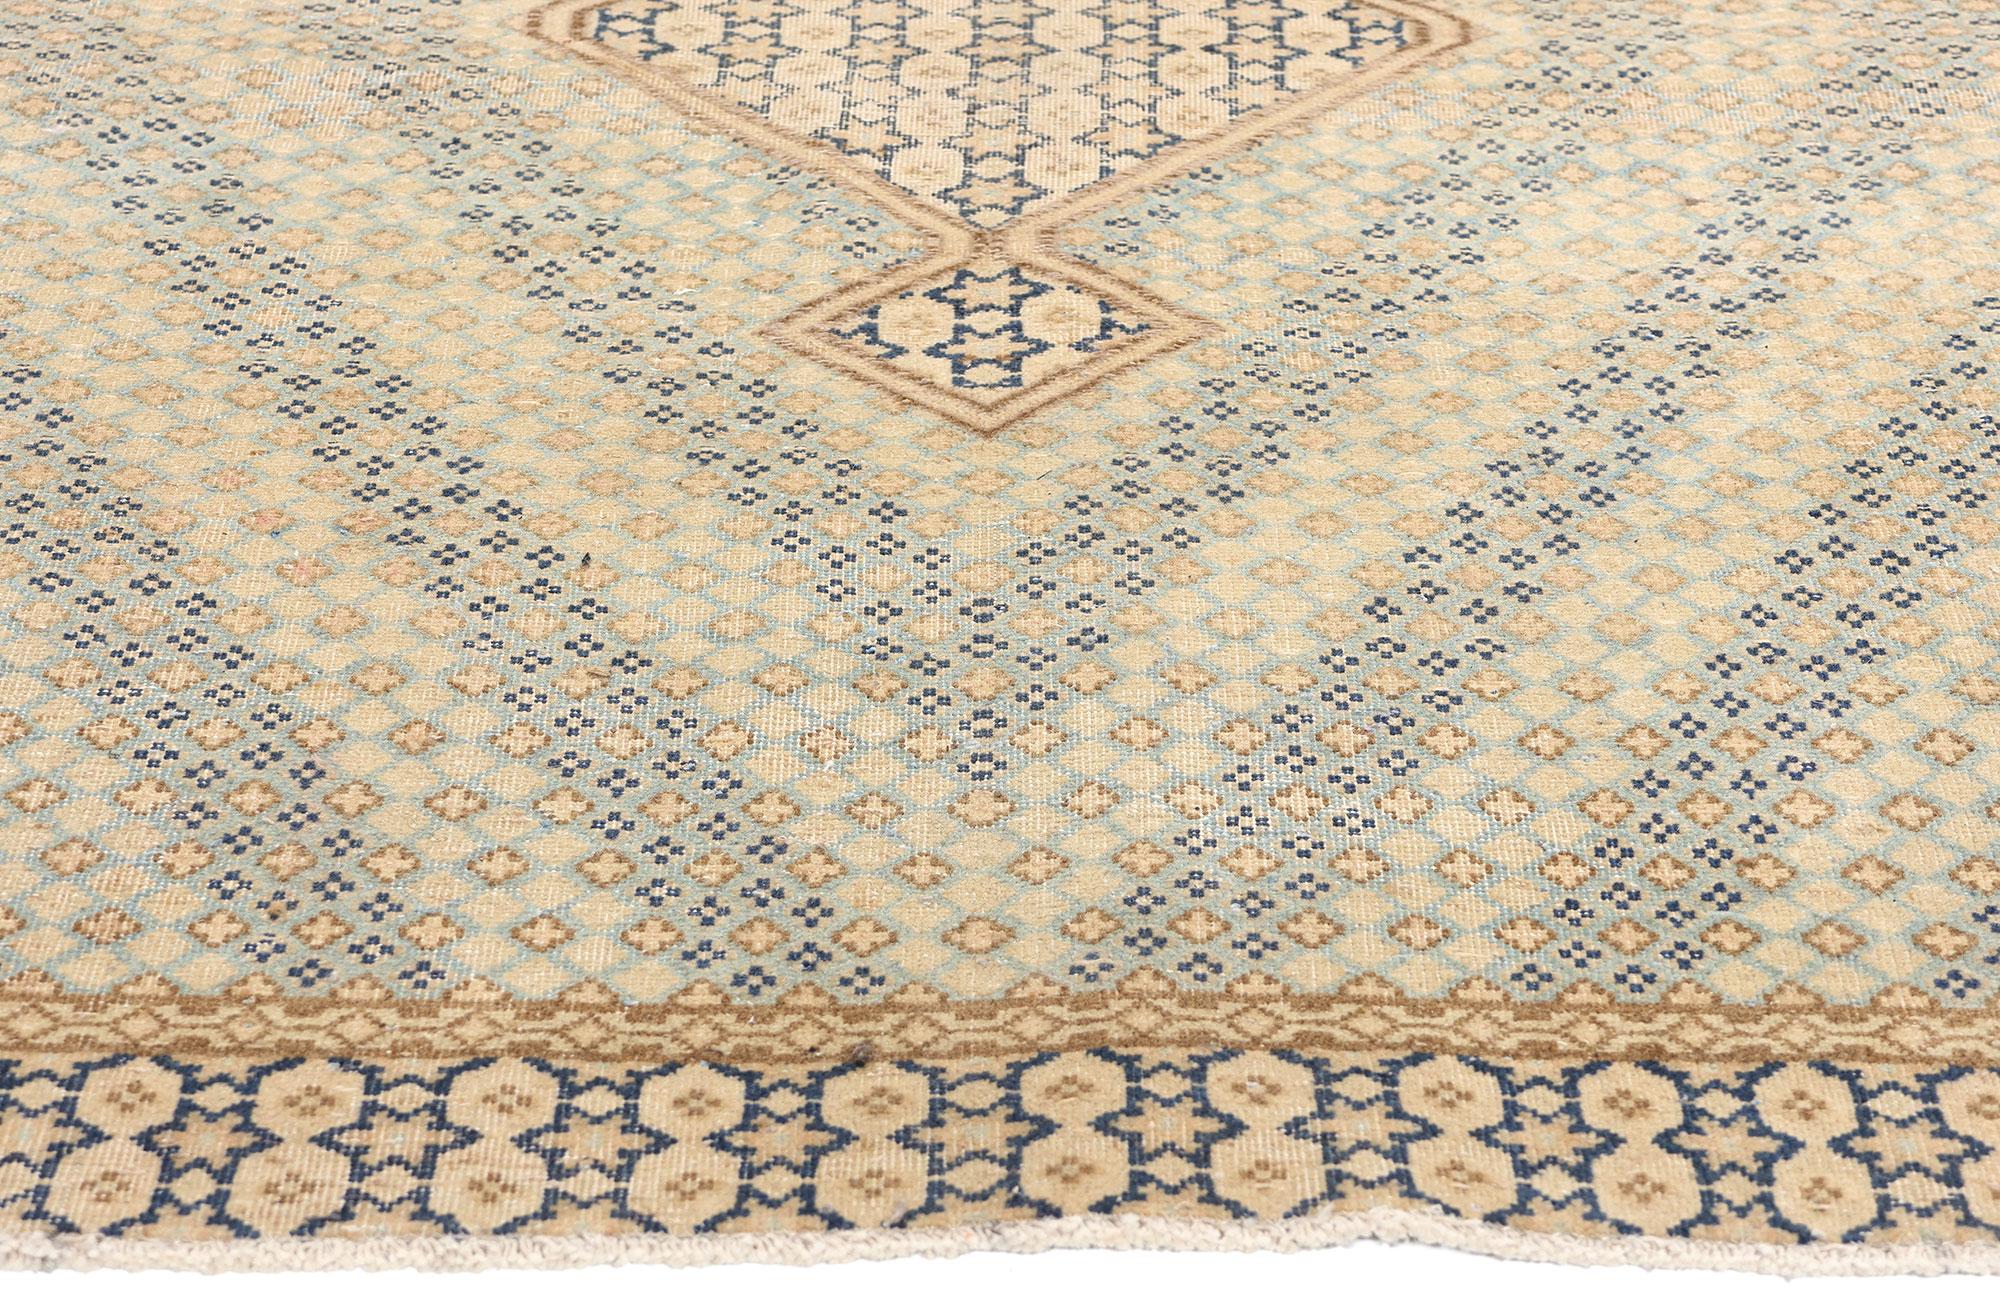 53752 Vintage-Worn Persian Kerman Rug, 05'03 x 06'01. Antique-washed Persian Kerman rugs are vintage rugs that undergo a specialized washing process to soften the colors, fade the patterns slightly, and create a weathered effect, simulating the look